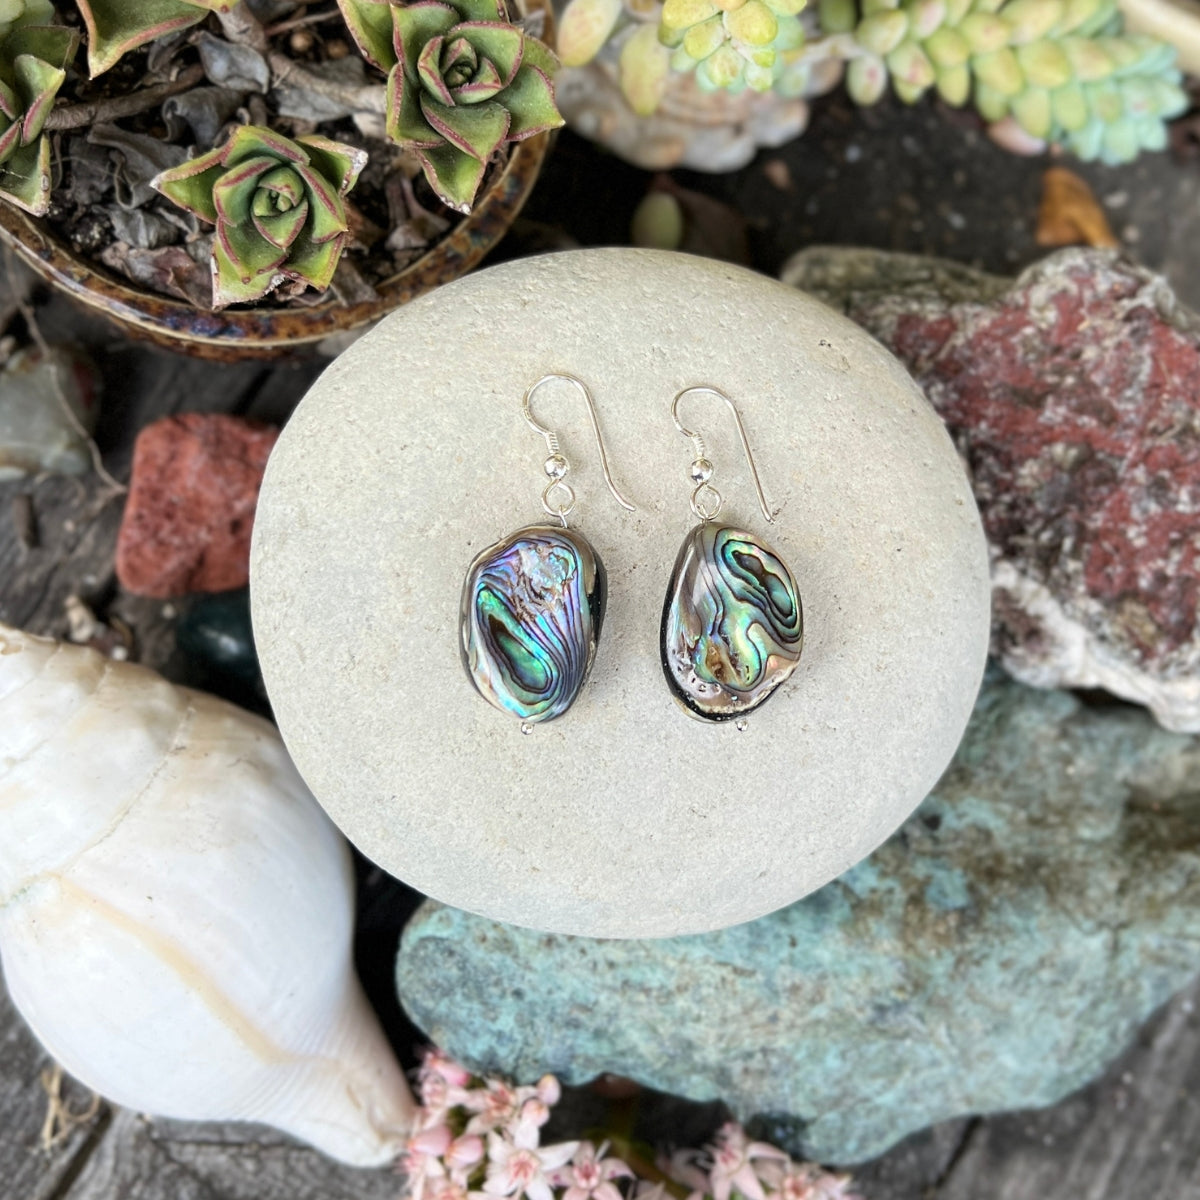 "Coastal Treasures" is a pair of earrings that celebrates the raw and untamed beauty of nature. 